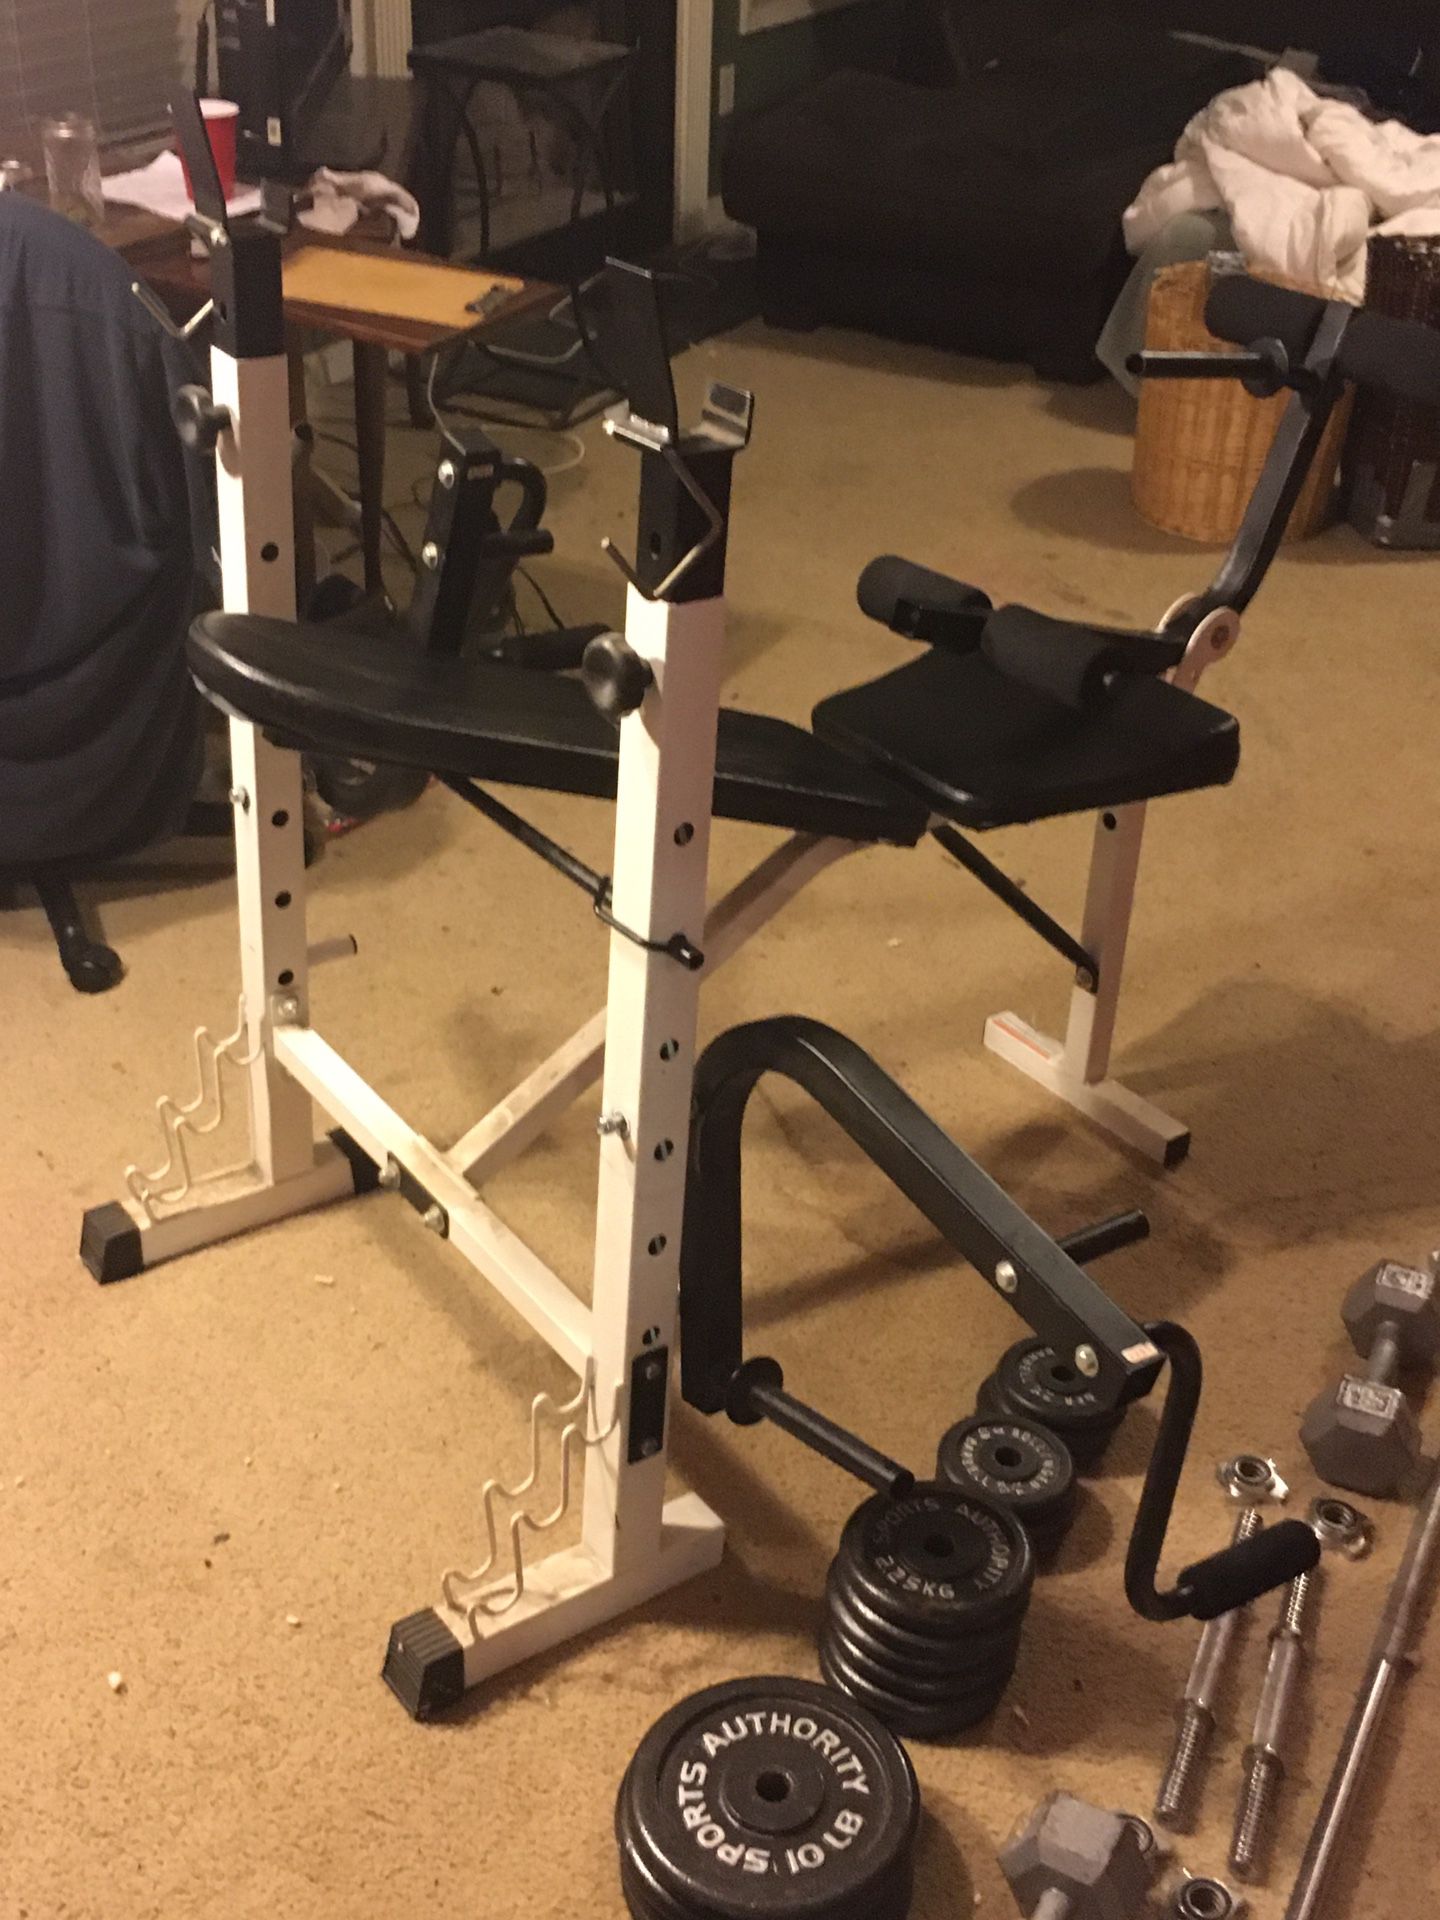 Performance 315 weight bench adjustable, removable lat swings 225 pound Of weight total not counting the bar